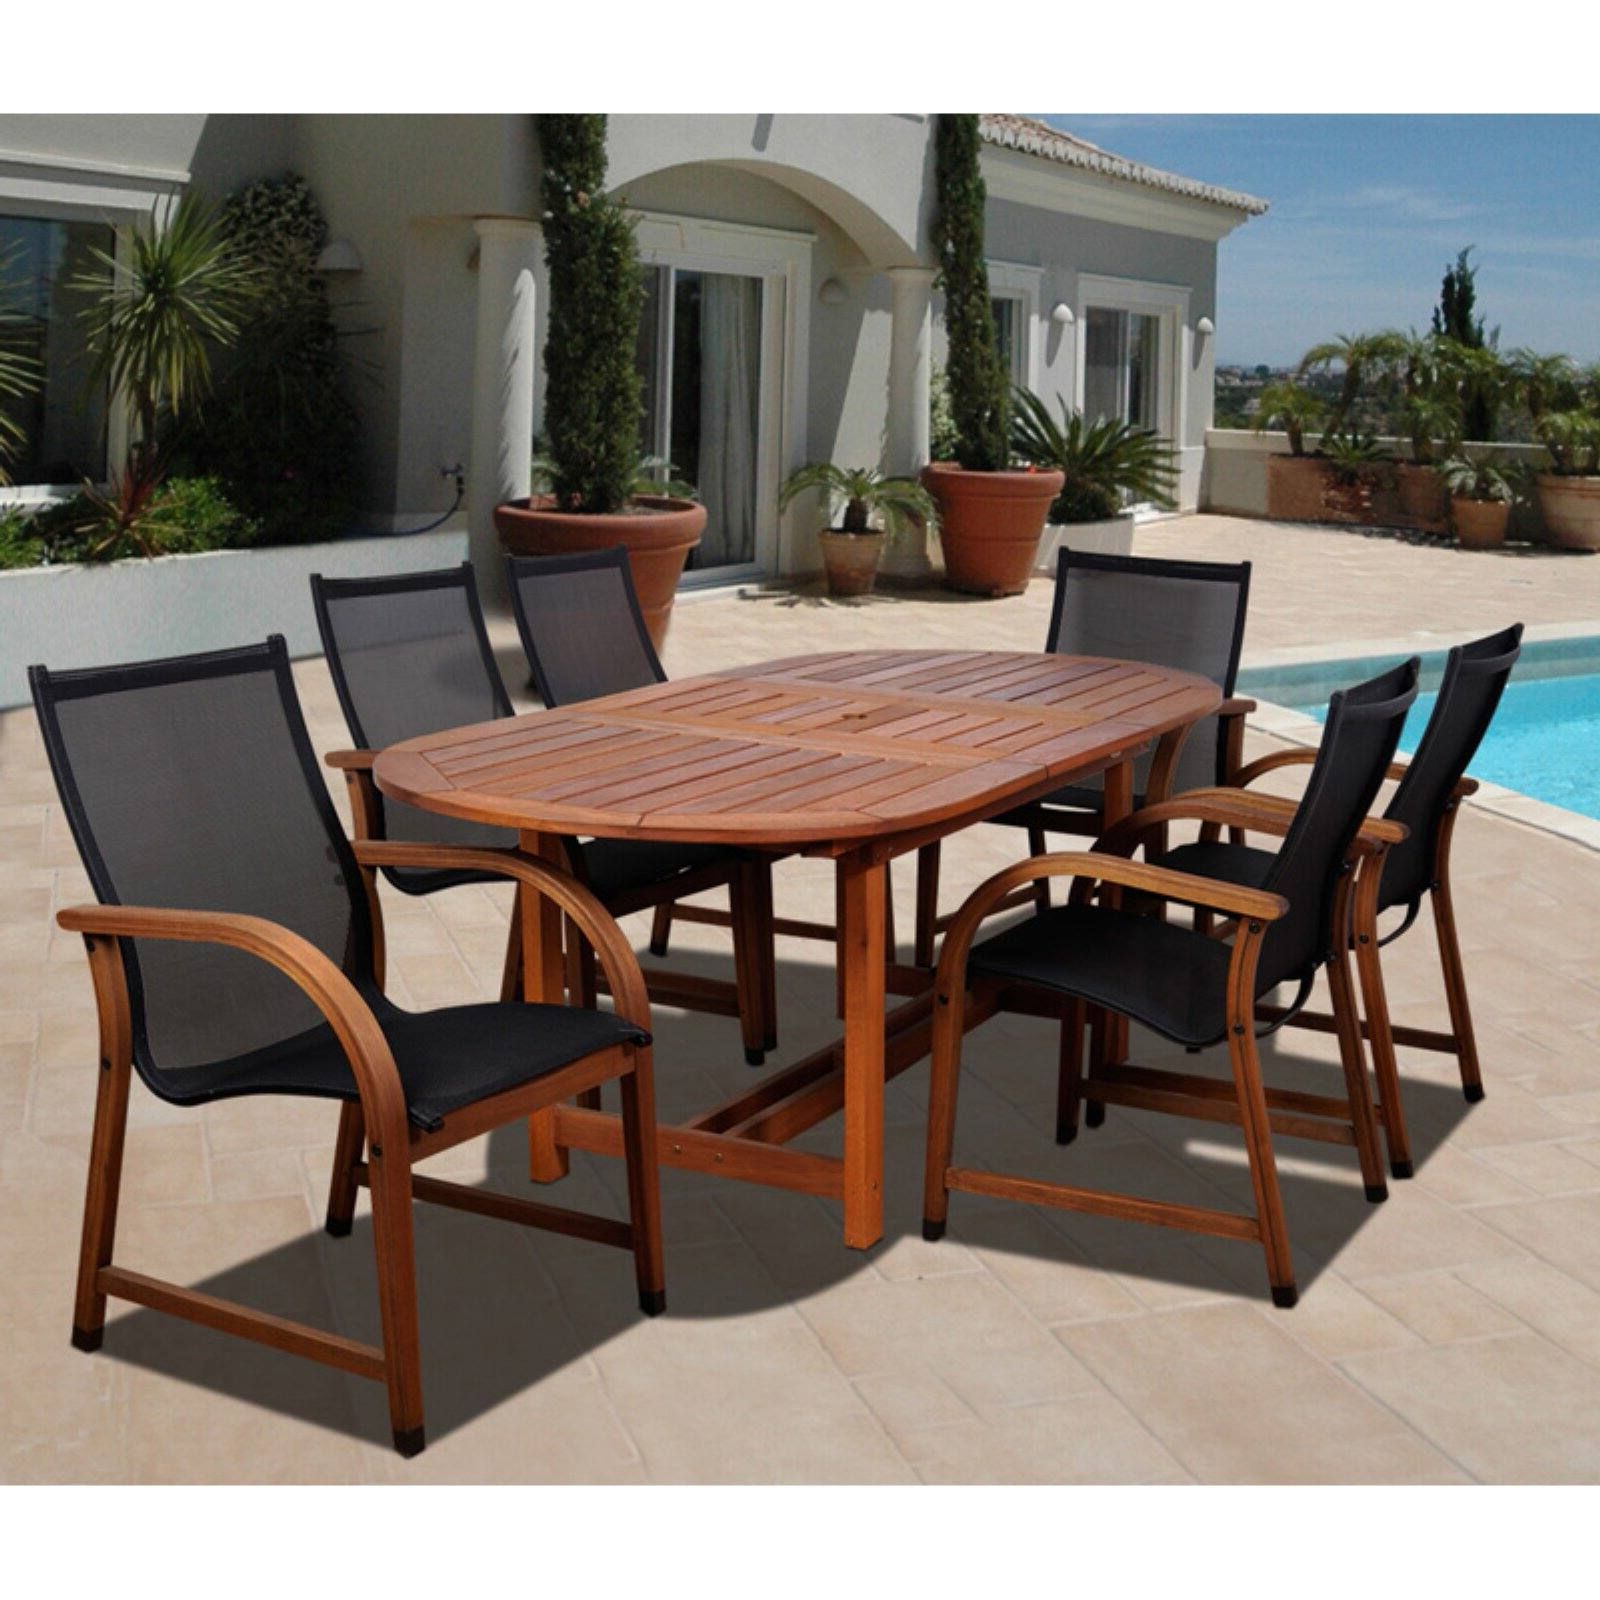 Recent Amazonia Indiana 7 Piece Oval Eucalyptus Patio Dining Set – Walmart Throughout 7 Piece Patio Dining Sets (View 3 of 15)